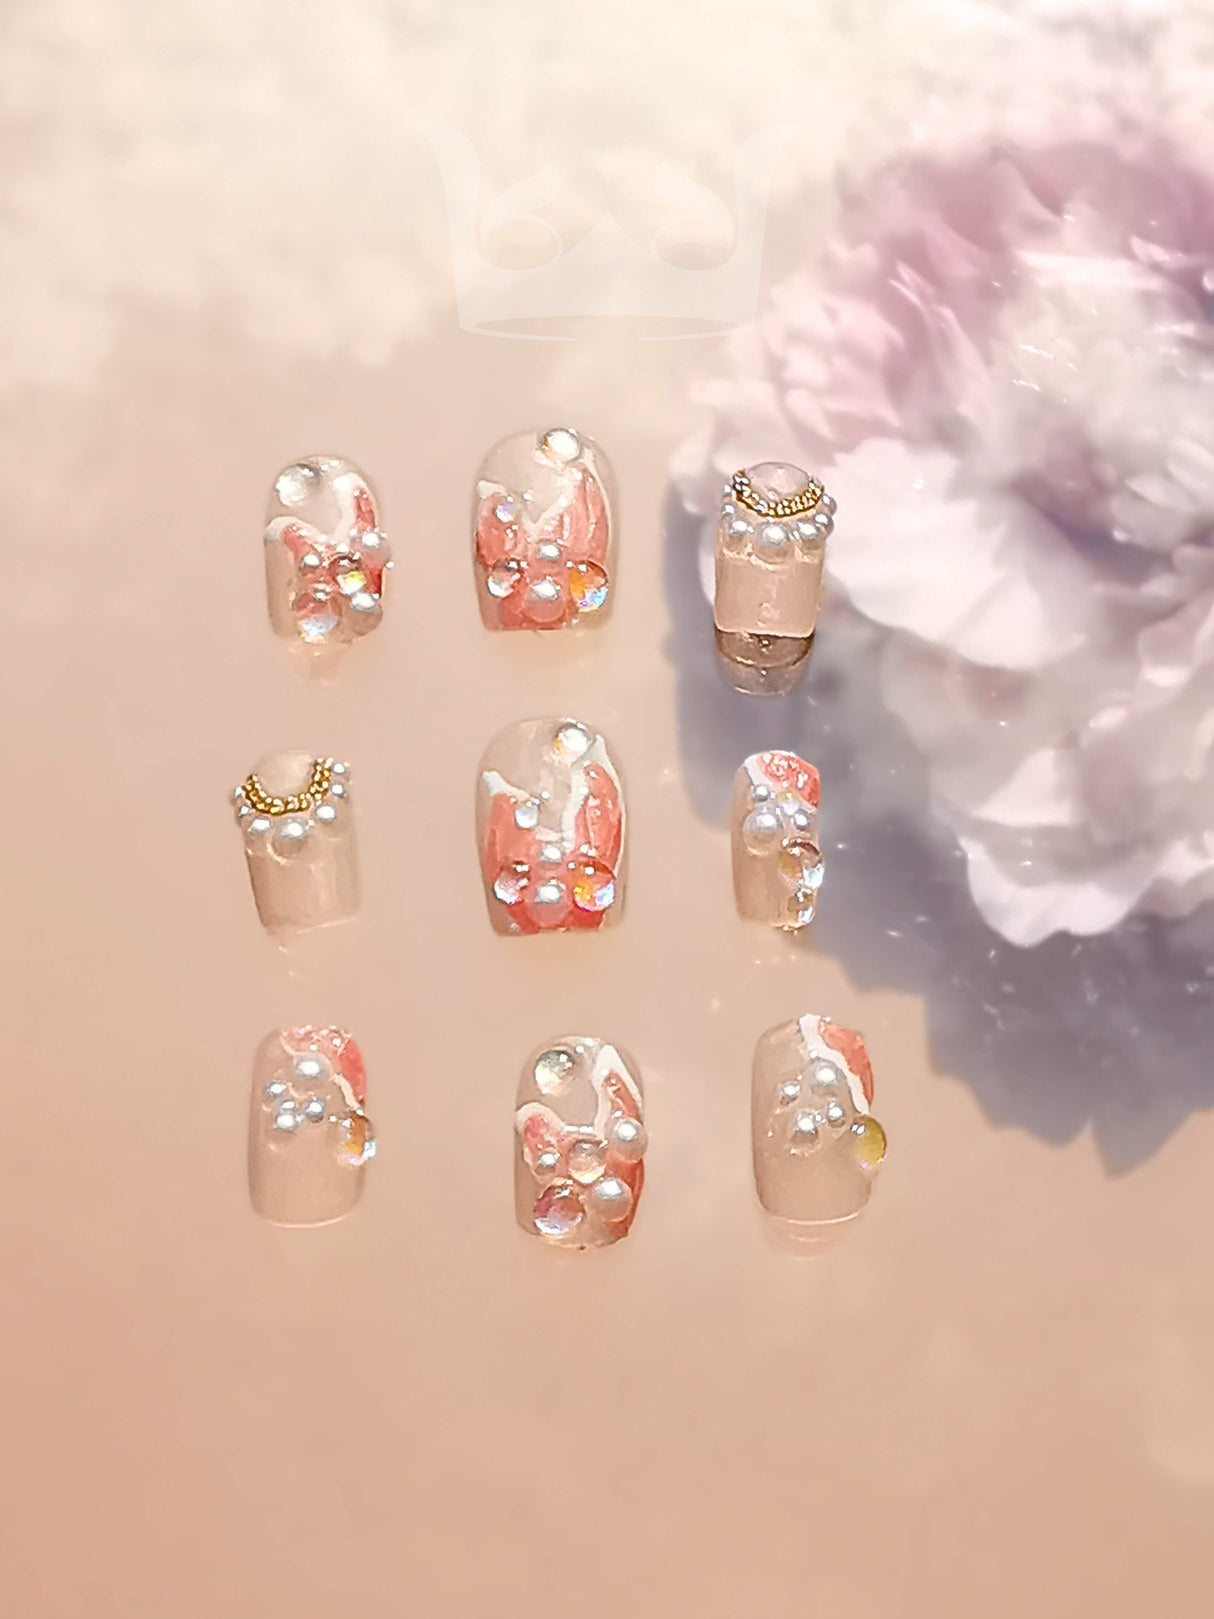 Cute nails with diamonds, gold bands, and clear/nude base for a fancy and personalized look. Ideal for special occasions and fashion statements.